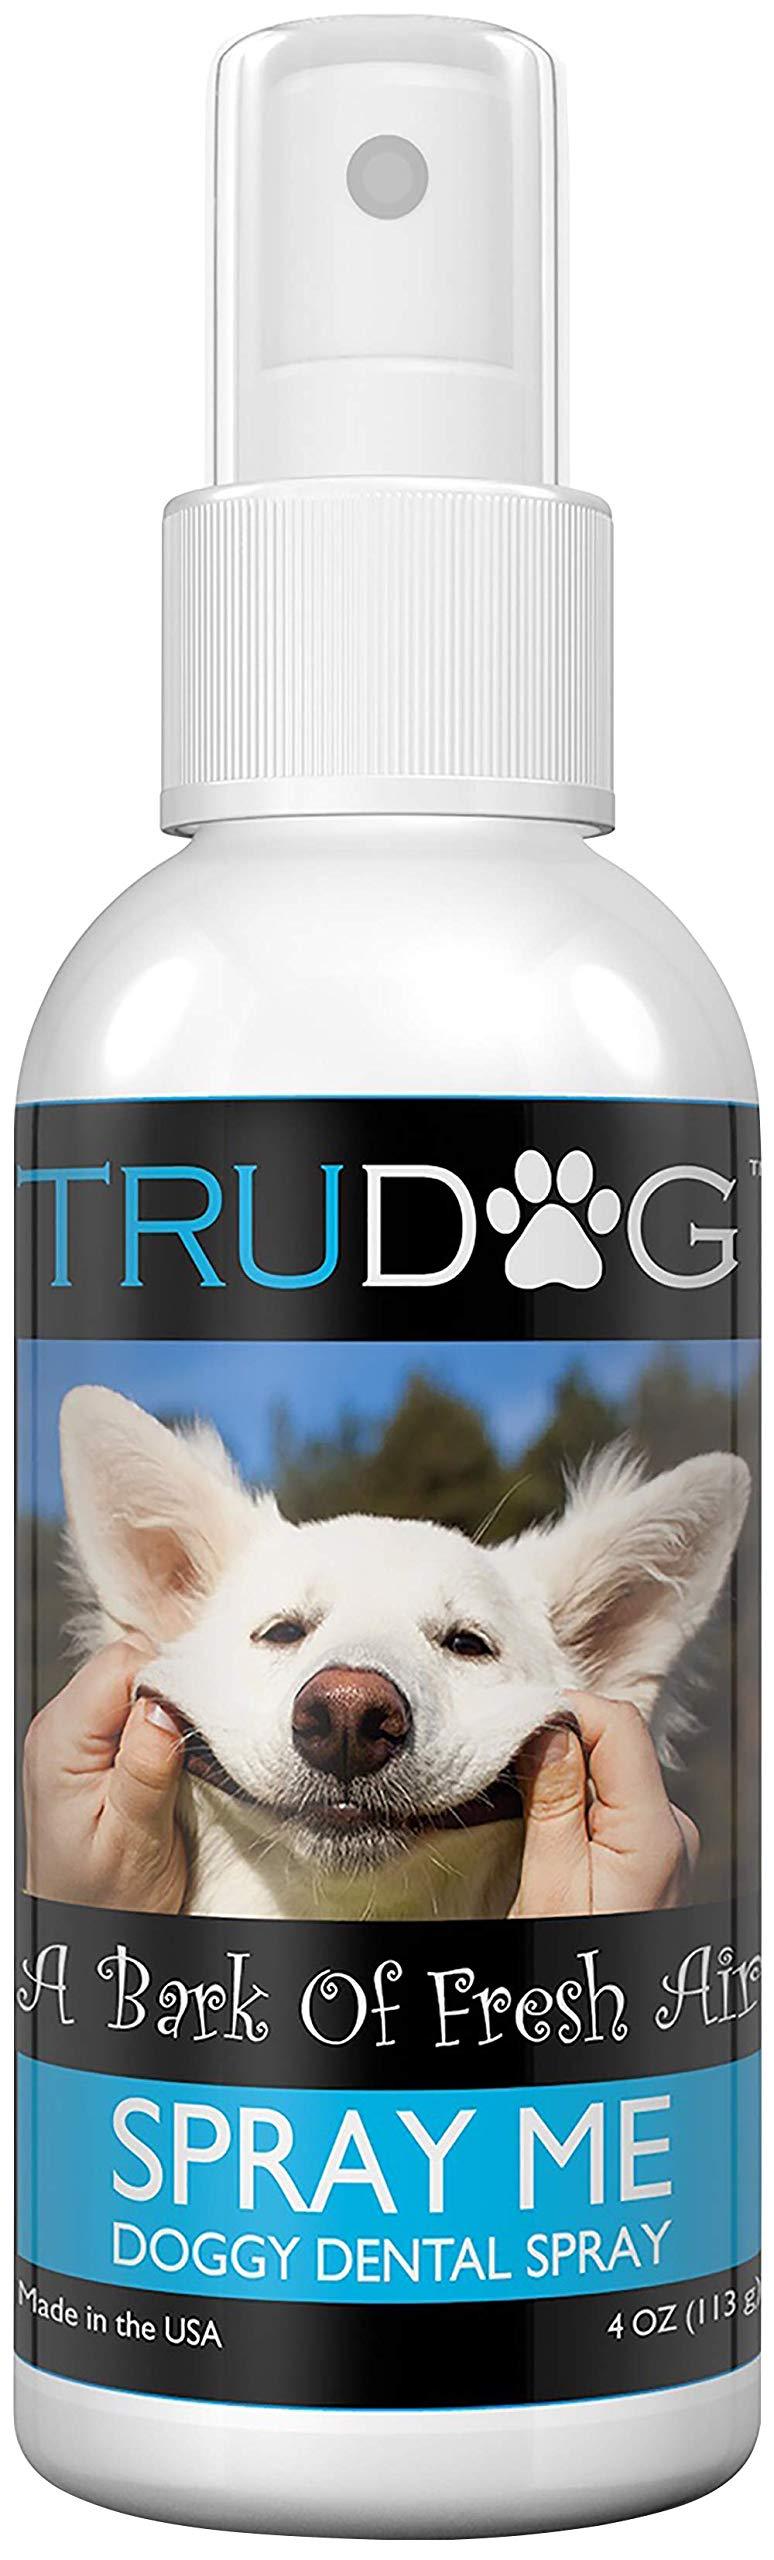 Dog Breath Freshener - Spray Me: Doggy Dental Spray (4Oz) - All Natural Ingredients That Freshen Breath While Reducing Dental Plaque and Tartar Build-Up Without Brushing - Veterinarian Approved 4 oz - PawsPlanet Australia